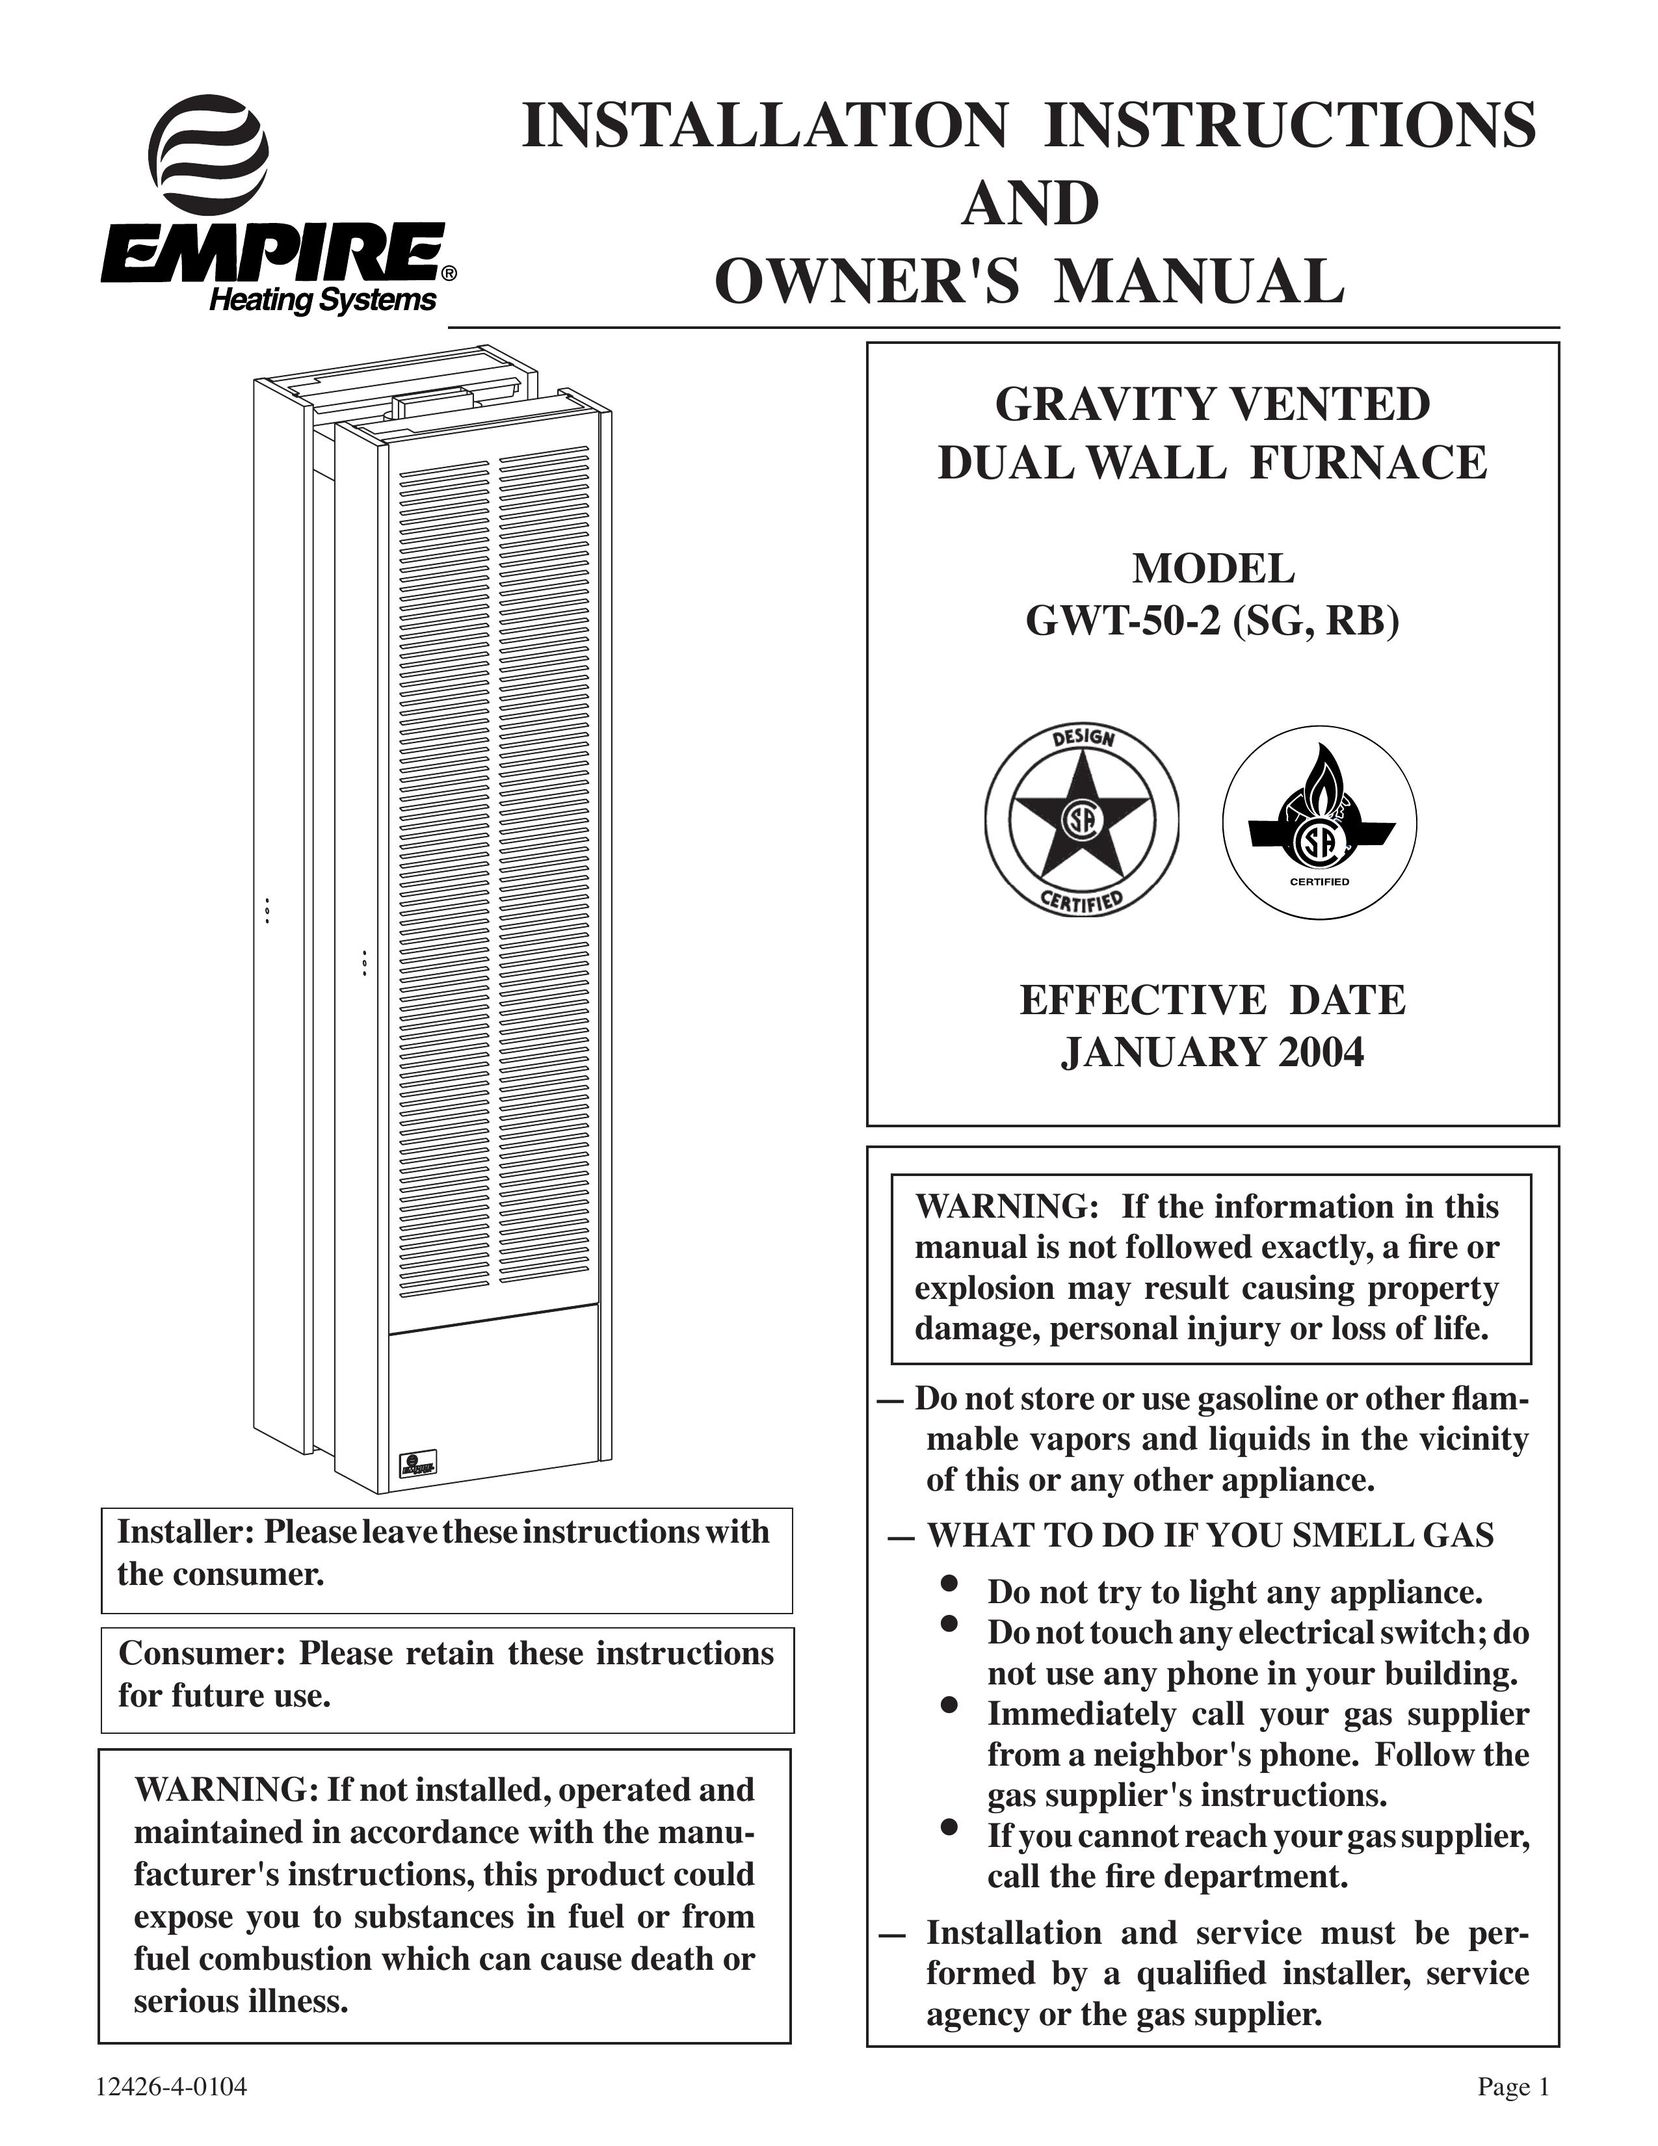 Empire Comfort Systems GWT-50-2 Furnace User Manual